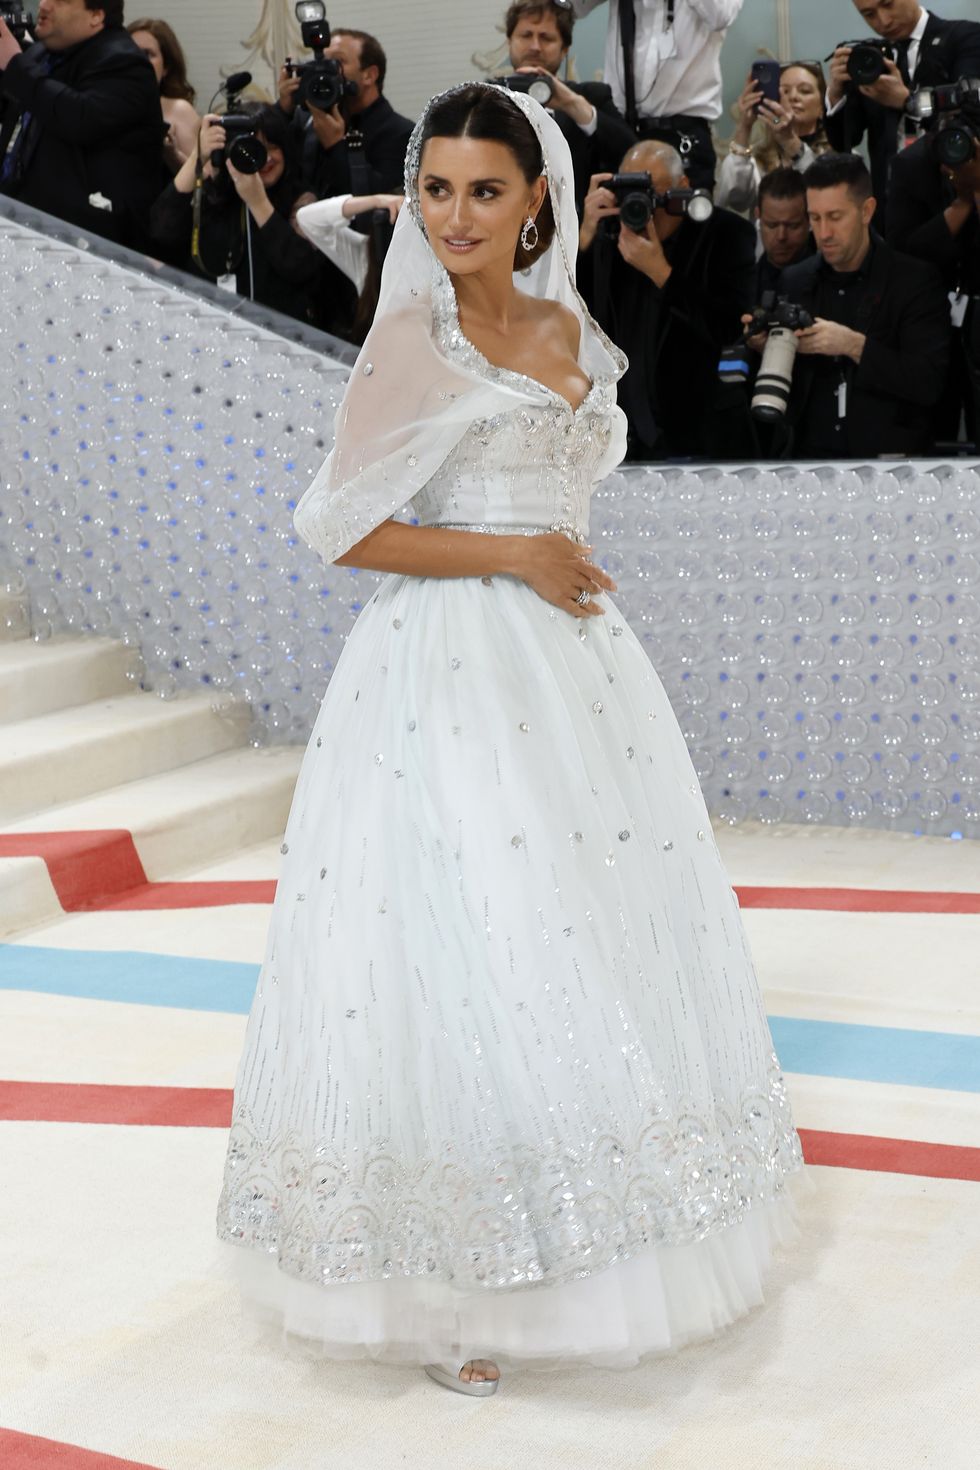 Met Gala 2023: Best red carpet looks and dresses - The Washington Post